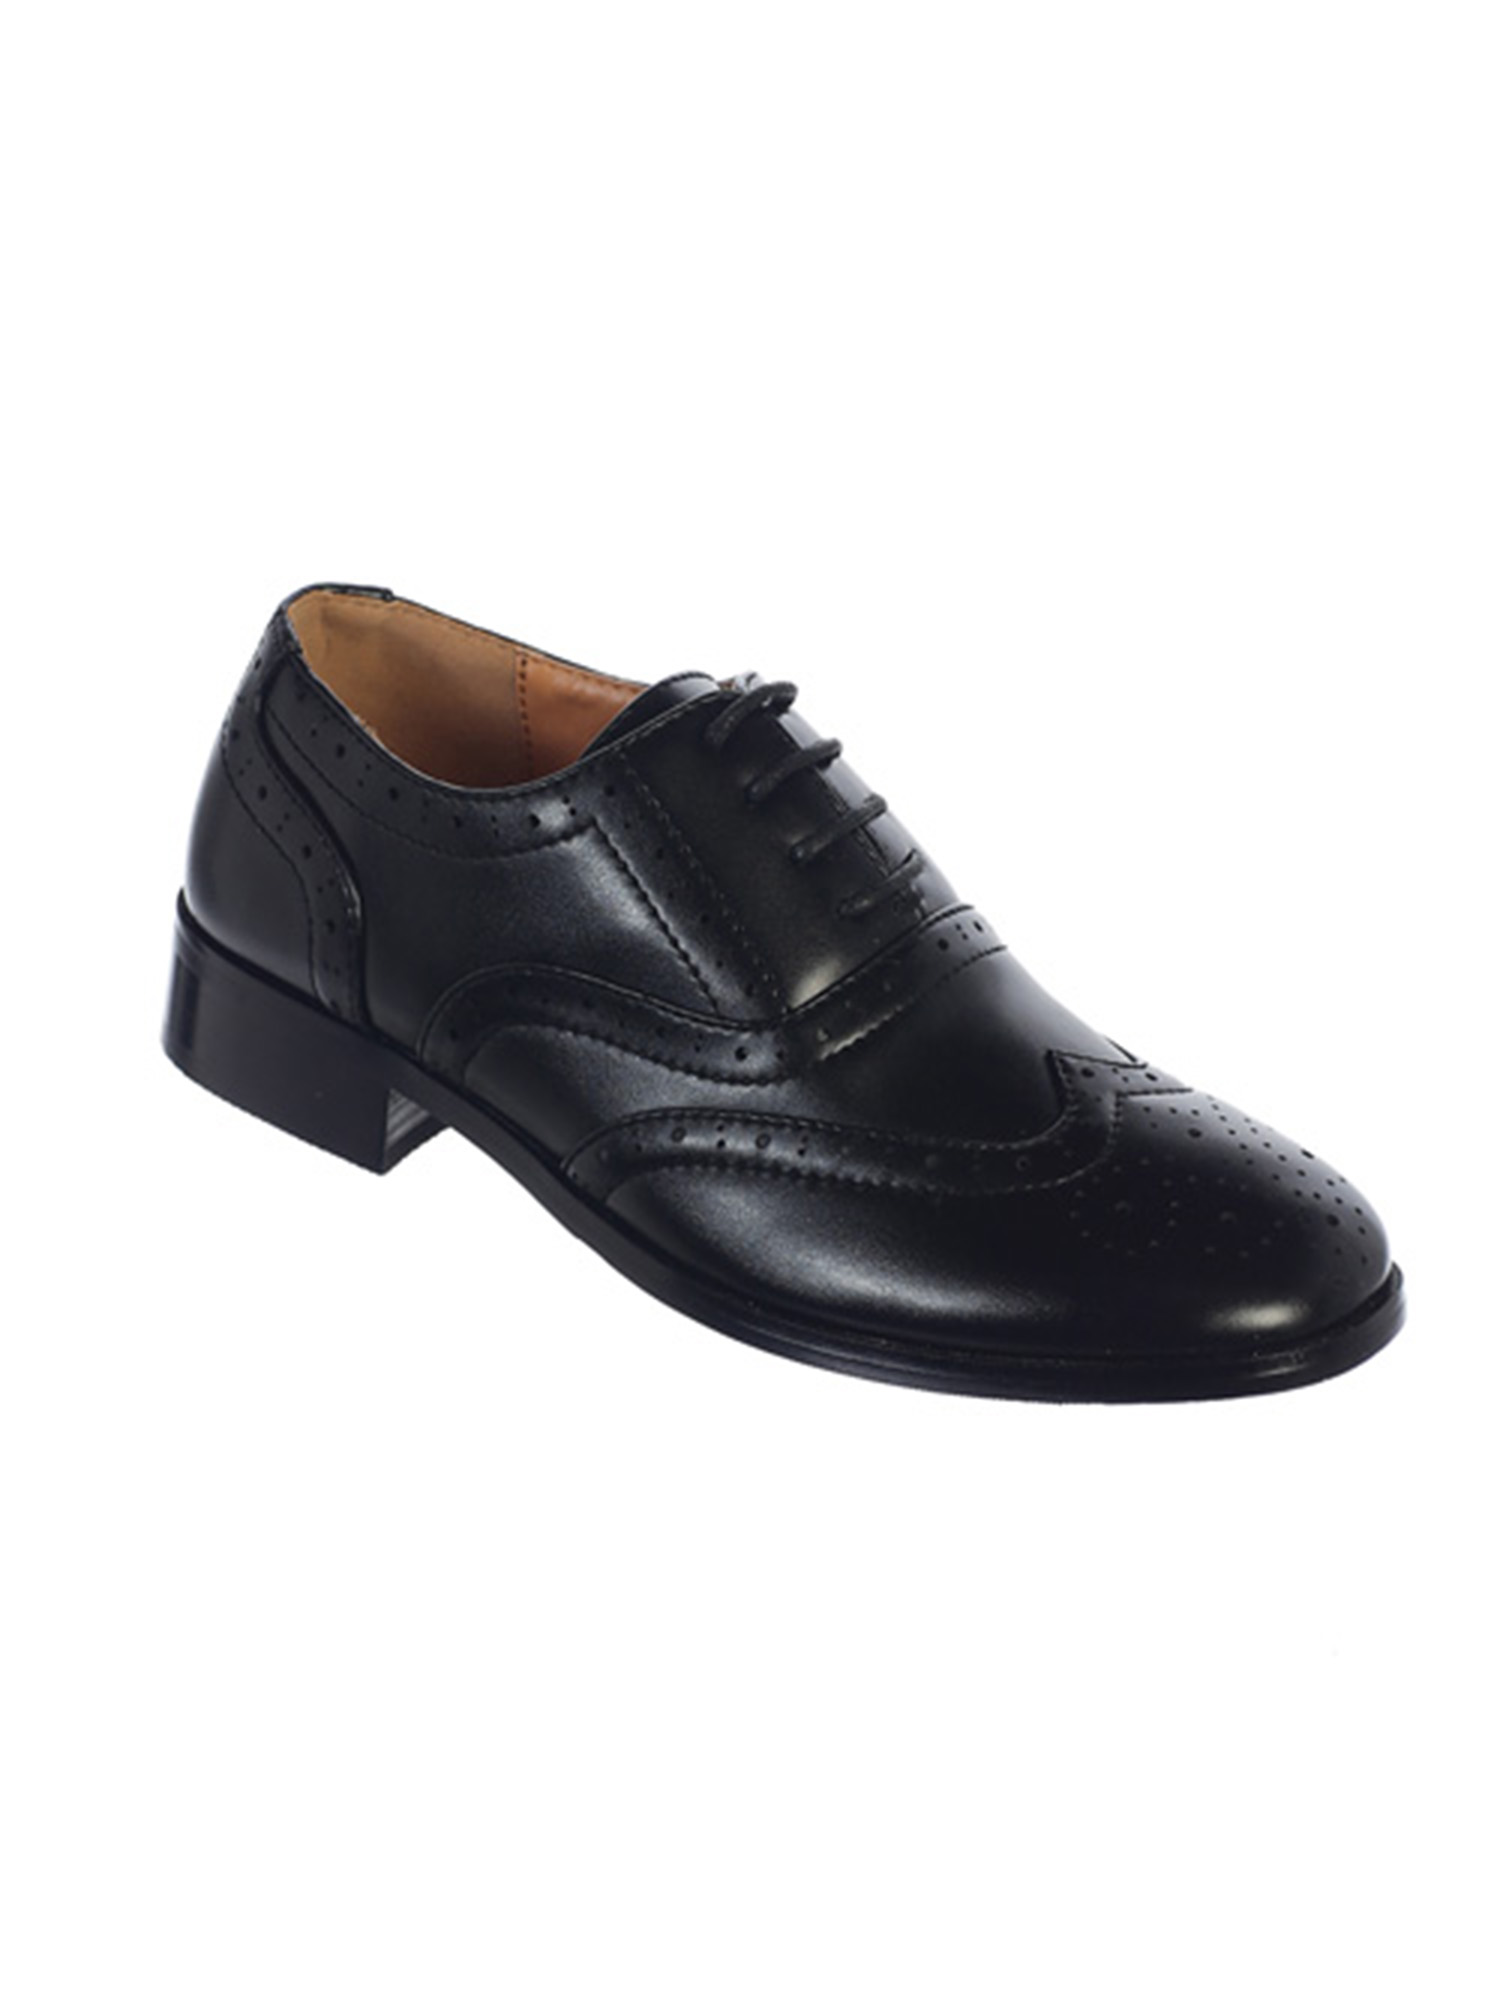 Avery Hill Boys Lace-Up Formal Oxford Style Special Occasion Dress Shoes - Black LittleKid 12